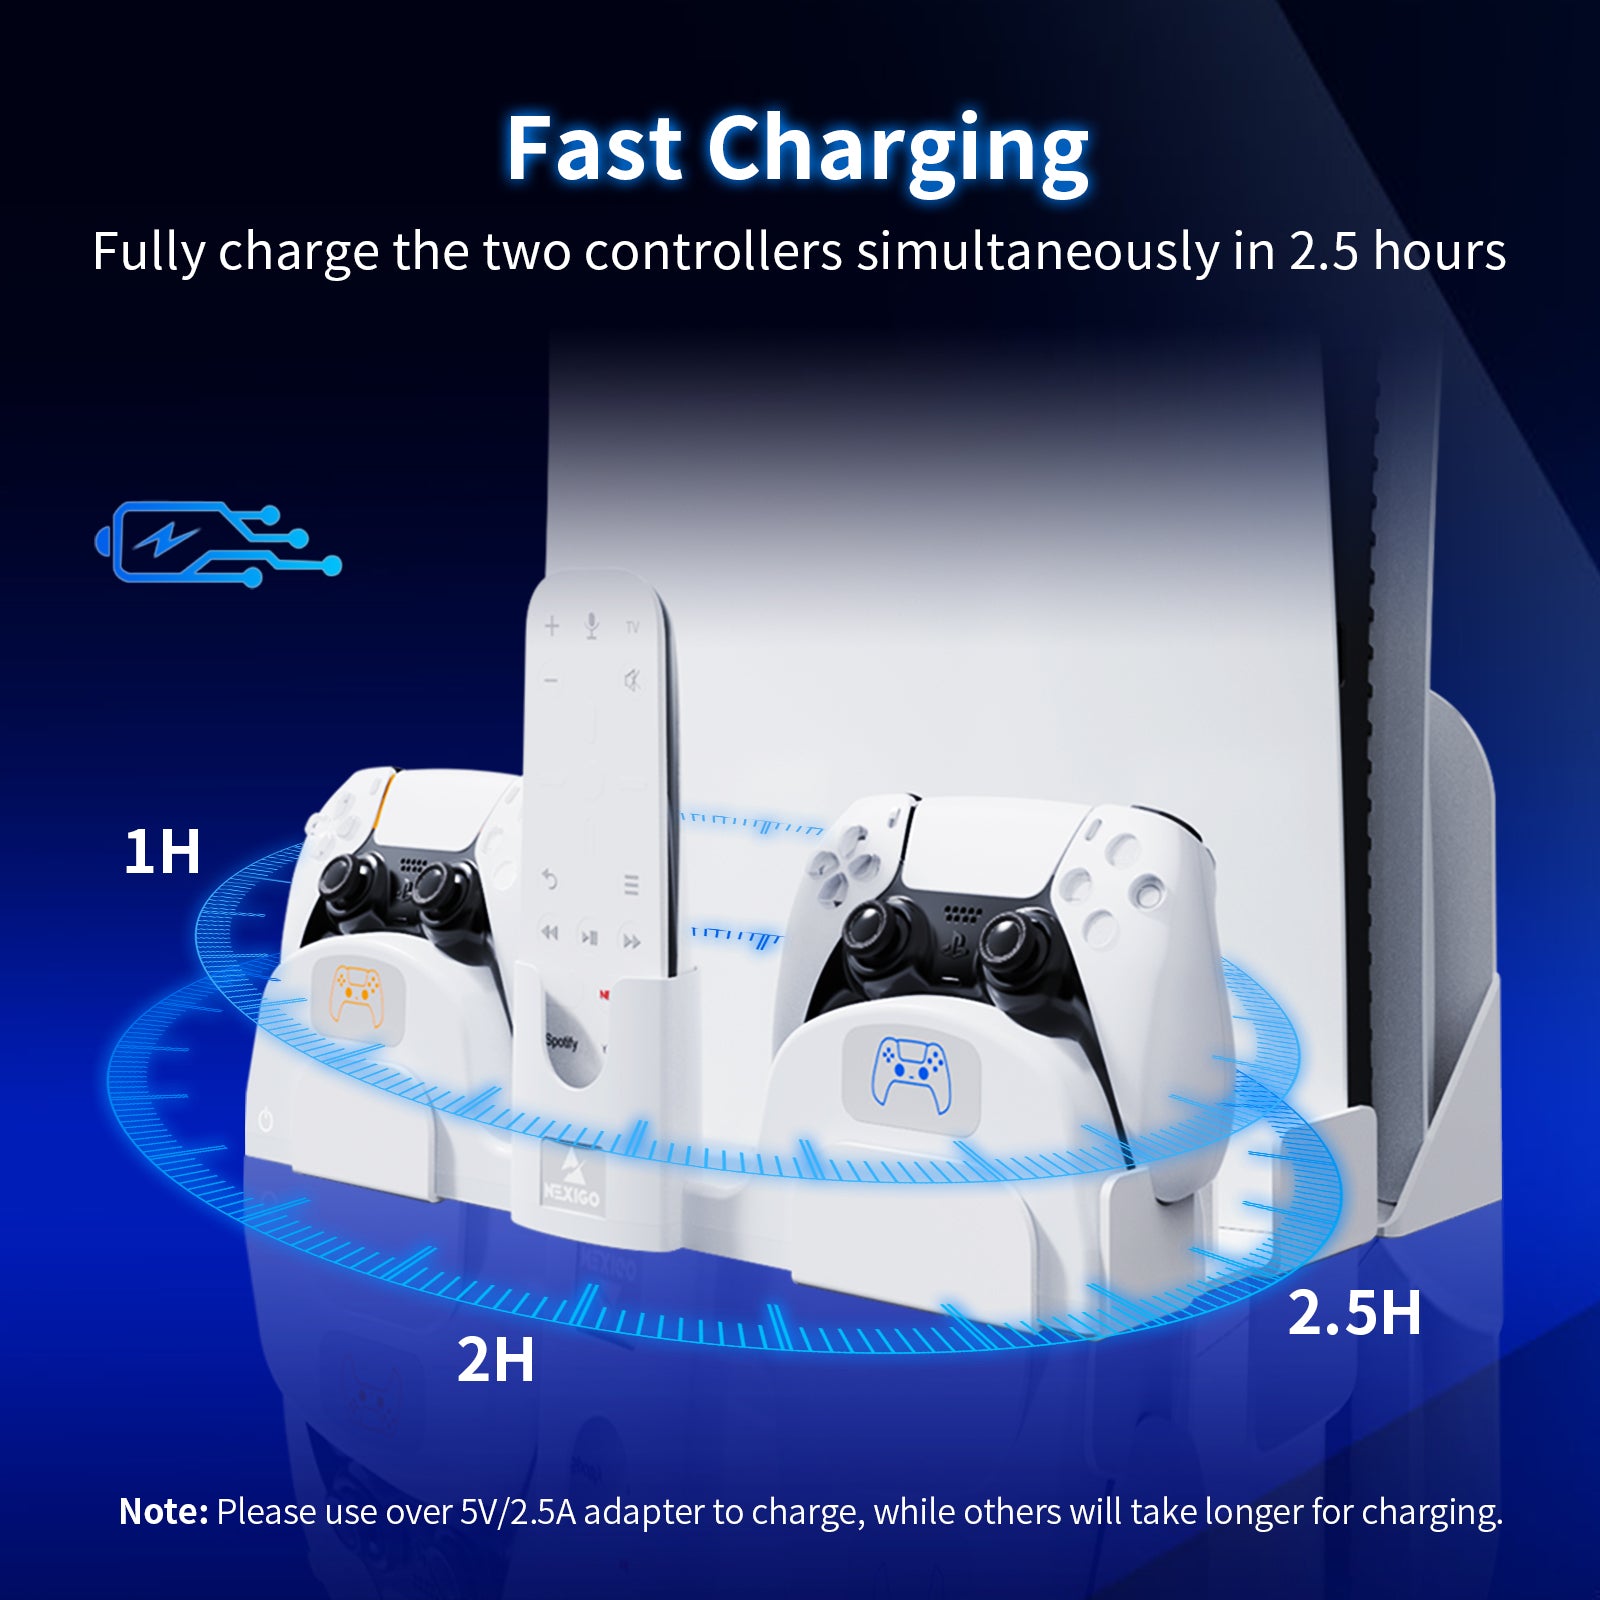 Simultaneously fully charge two controllers in just 2.5 hours. 